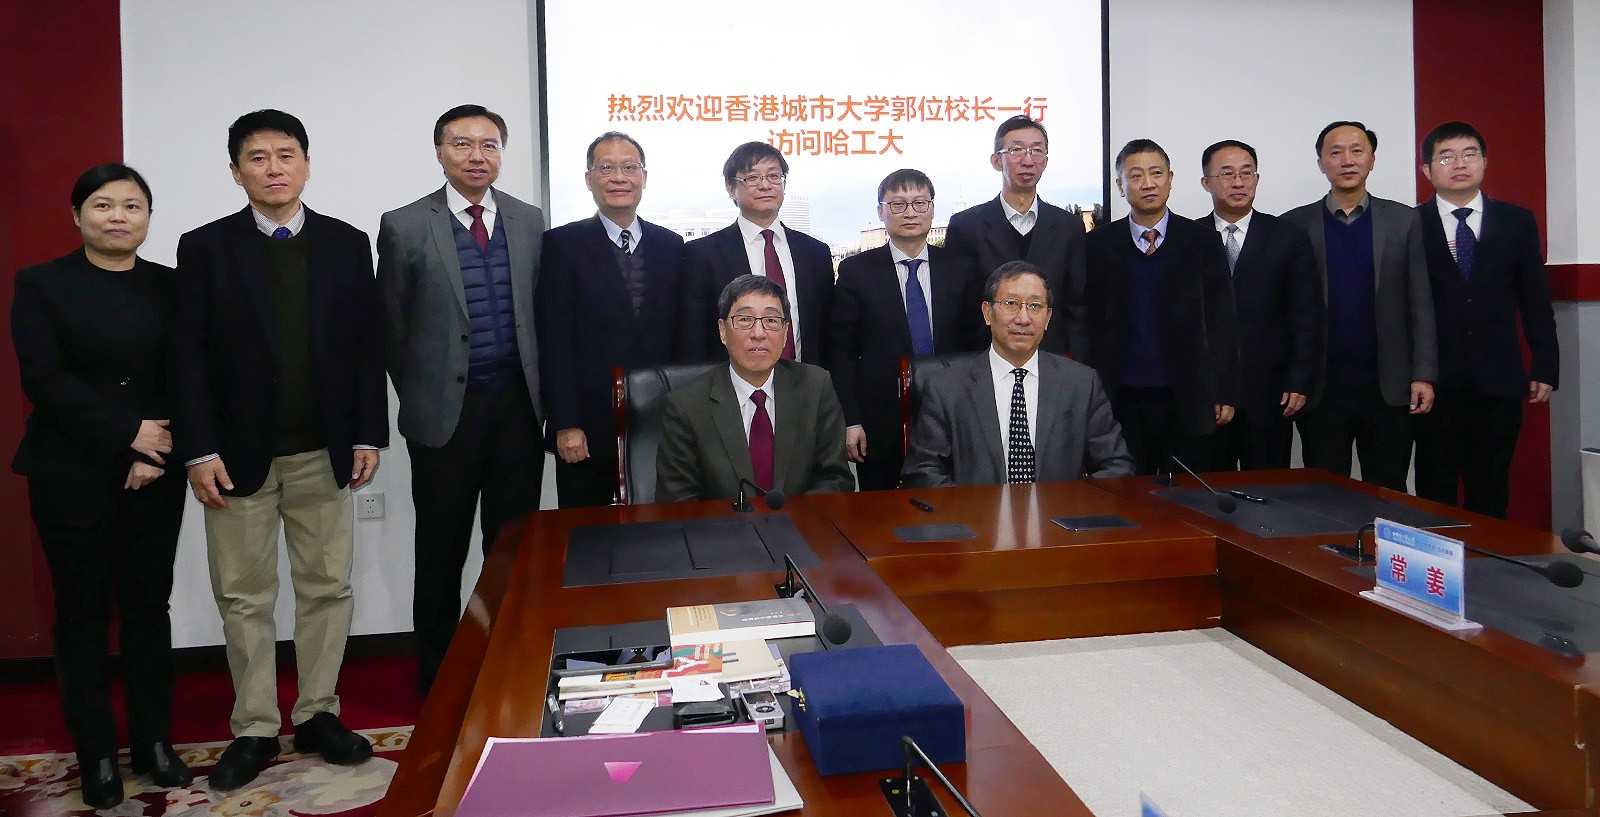 Professor Way Kuo (left, front row) and members of the CityU delegation are warmly welcomed by Professor Zhou Yu (right, front row), HIT President, and its management team during the visit to HIT.